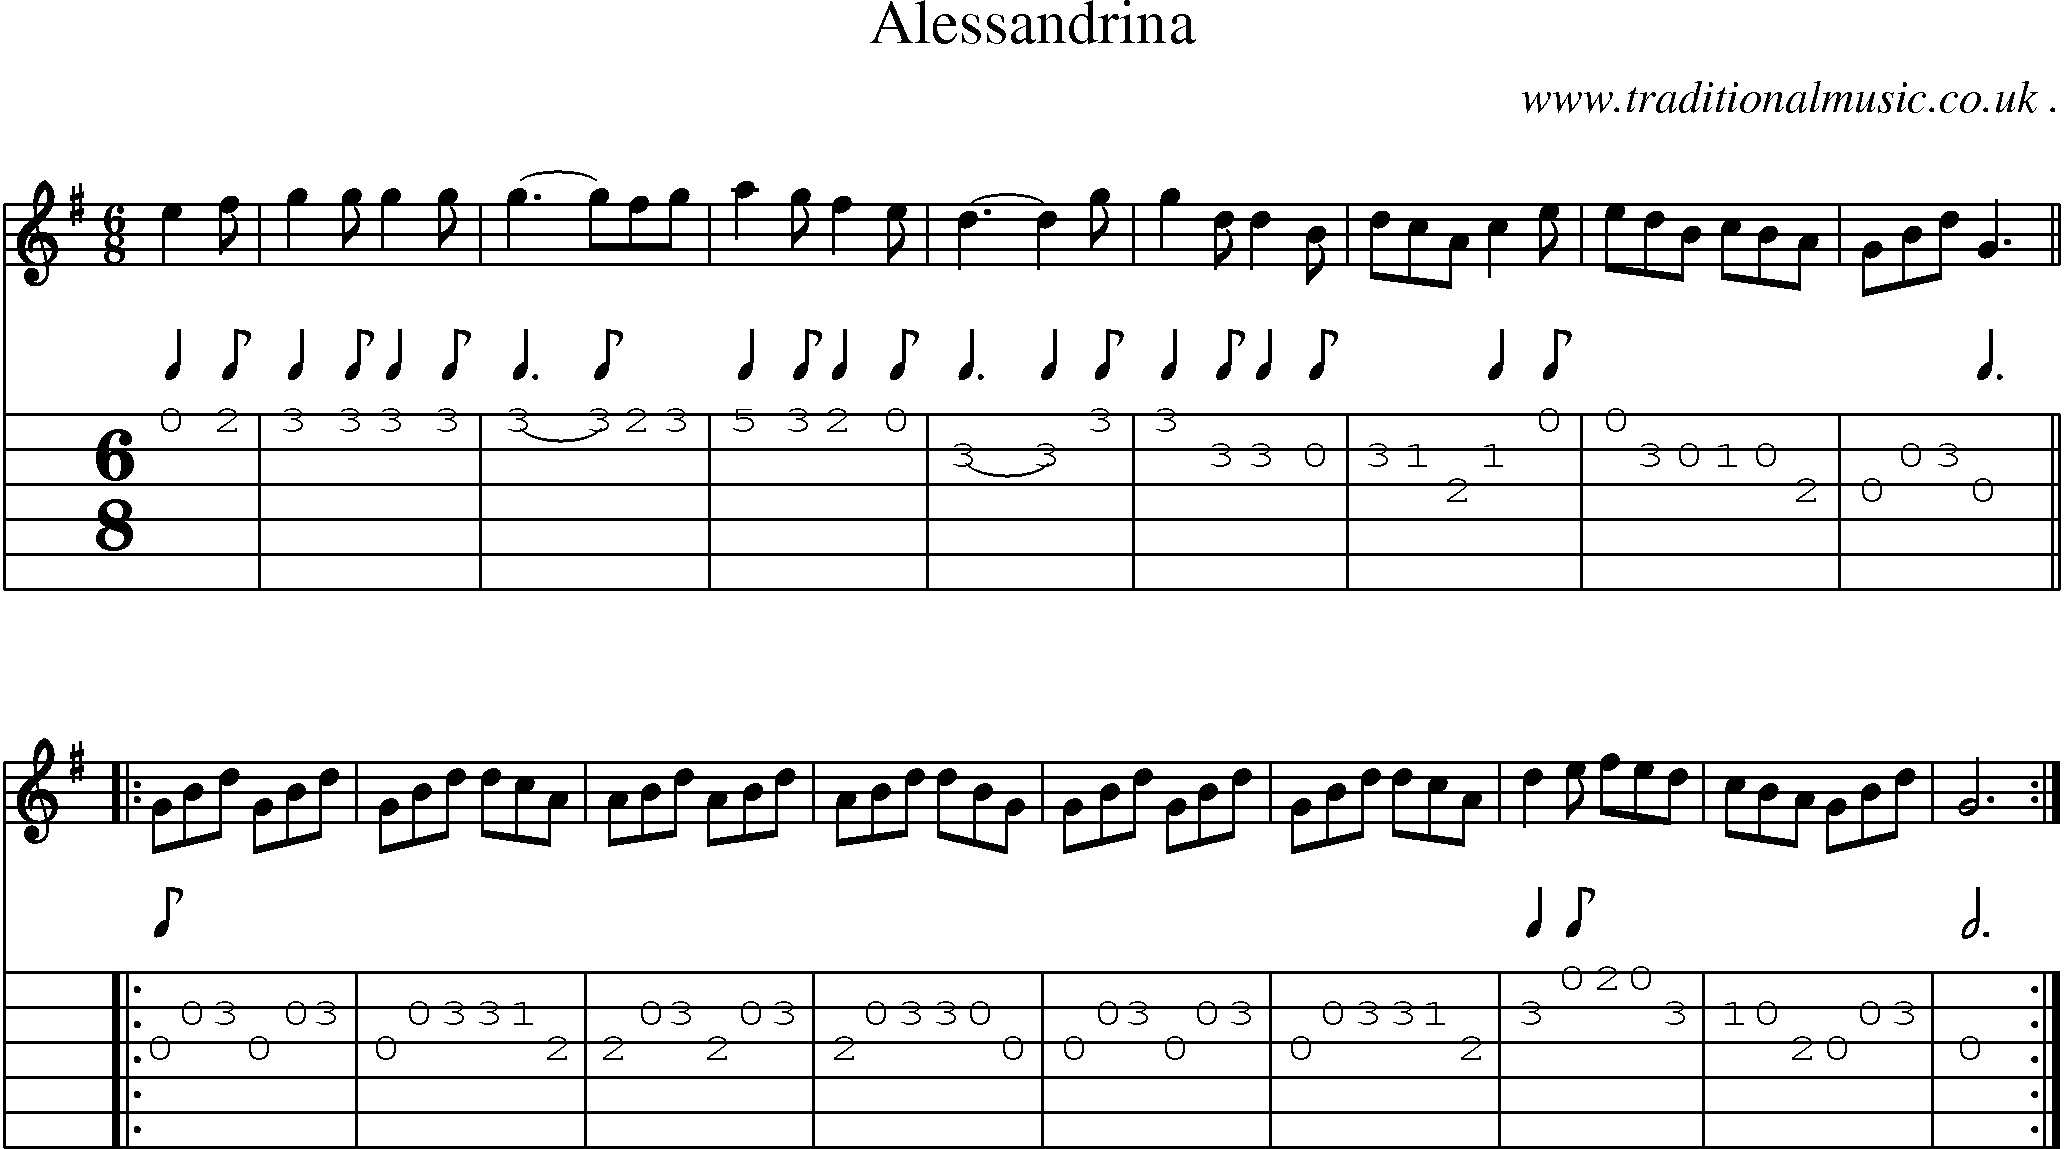 Sheet-Music and Guitar Tabs for Alessandrina